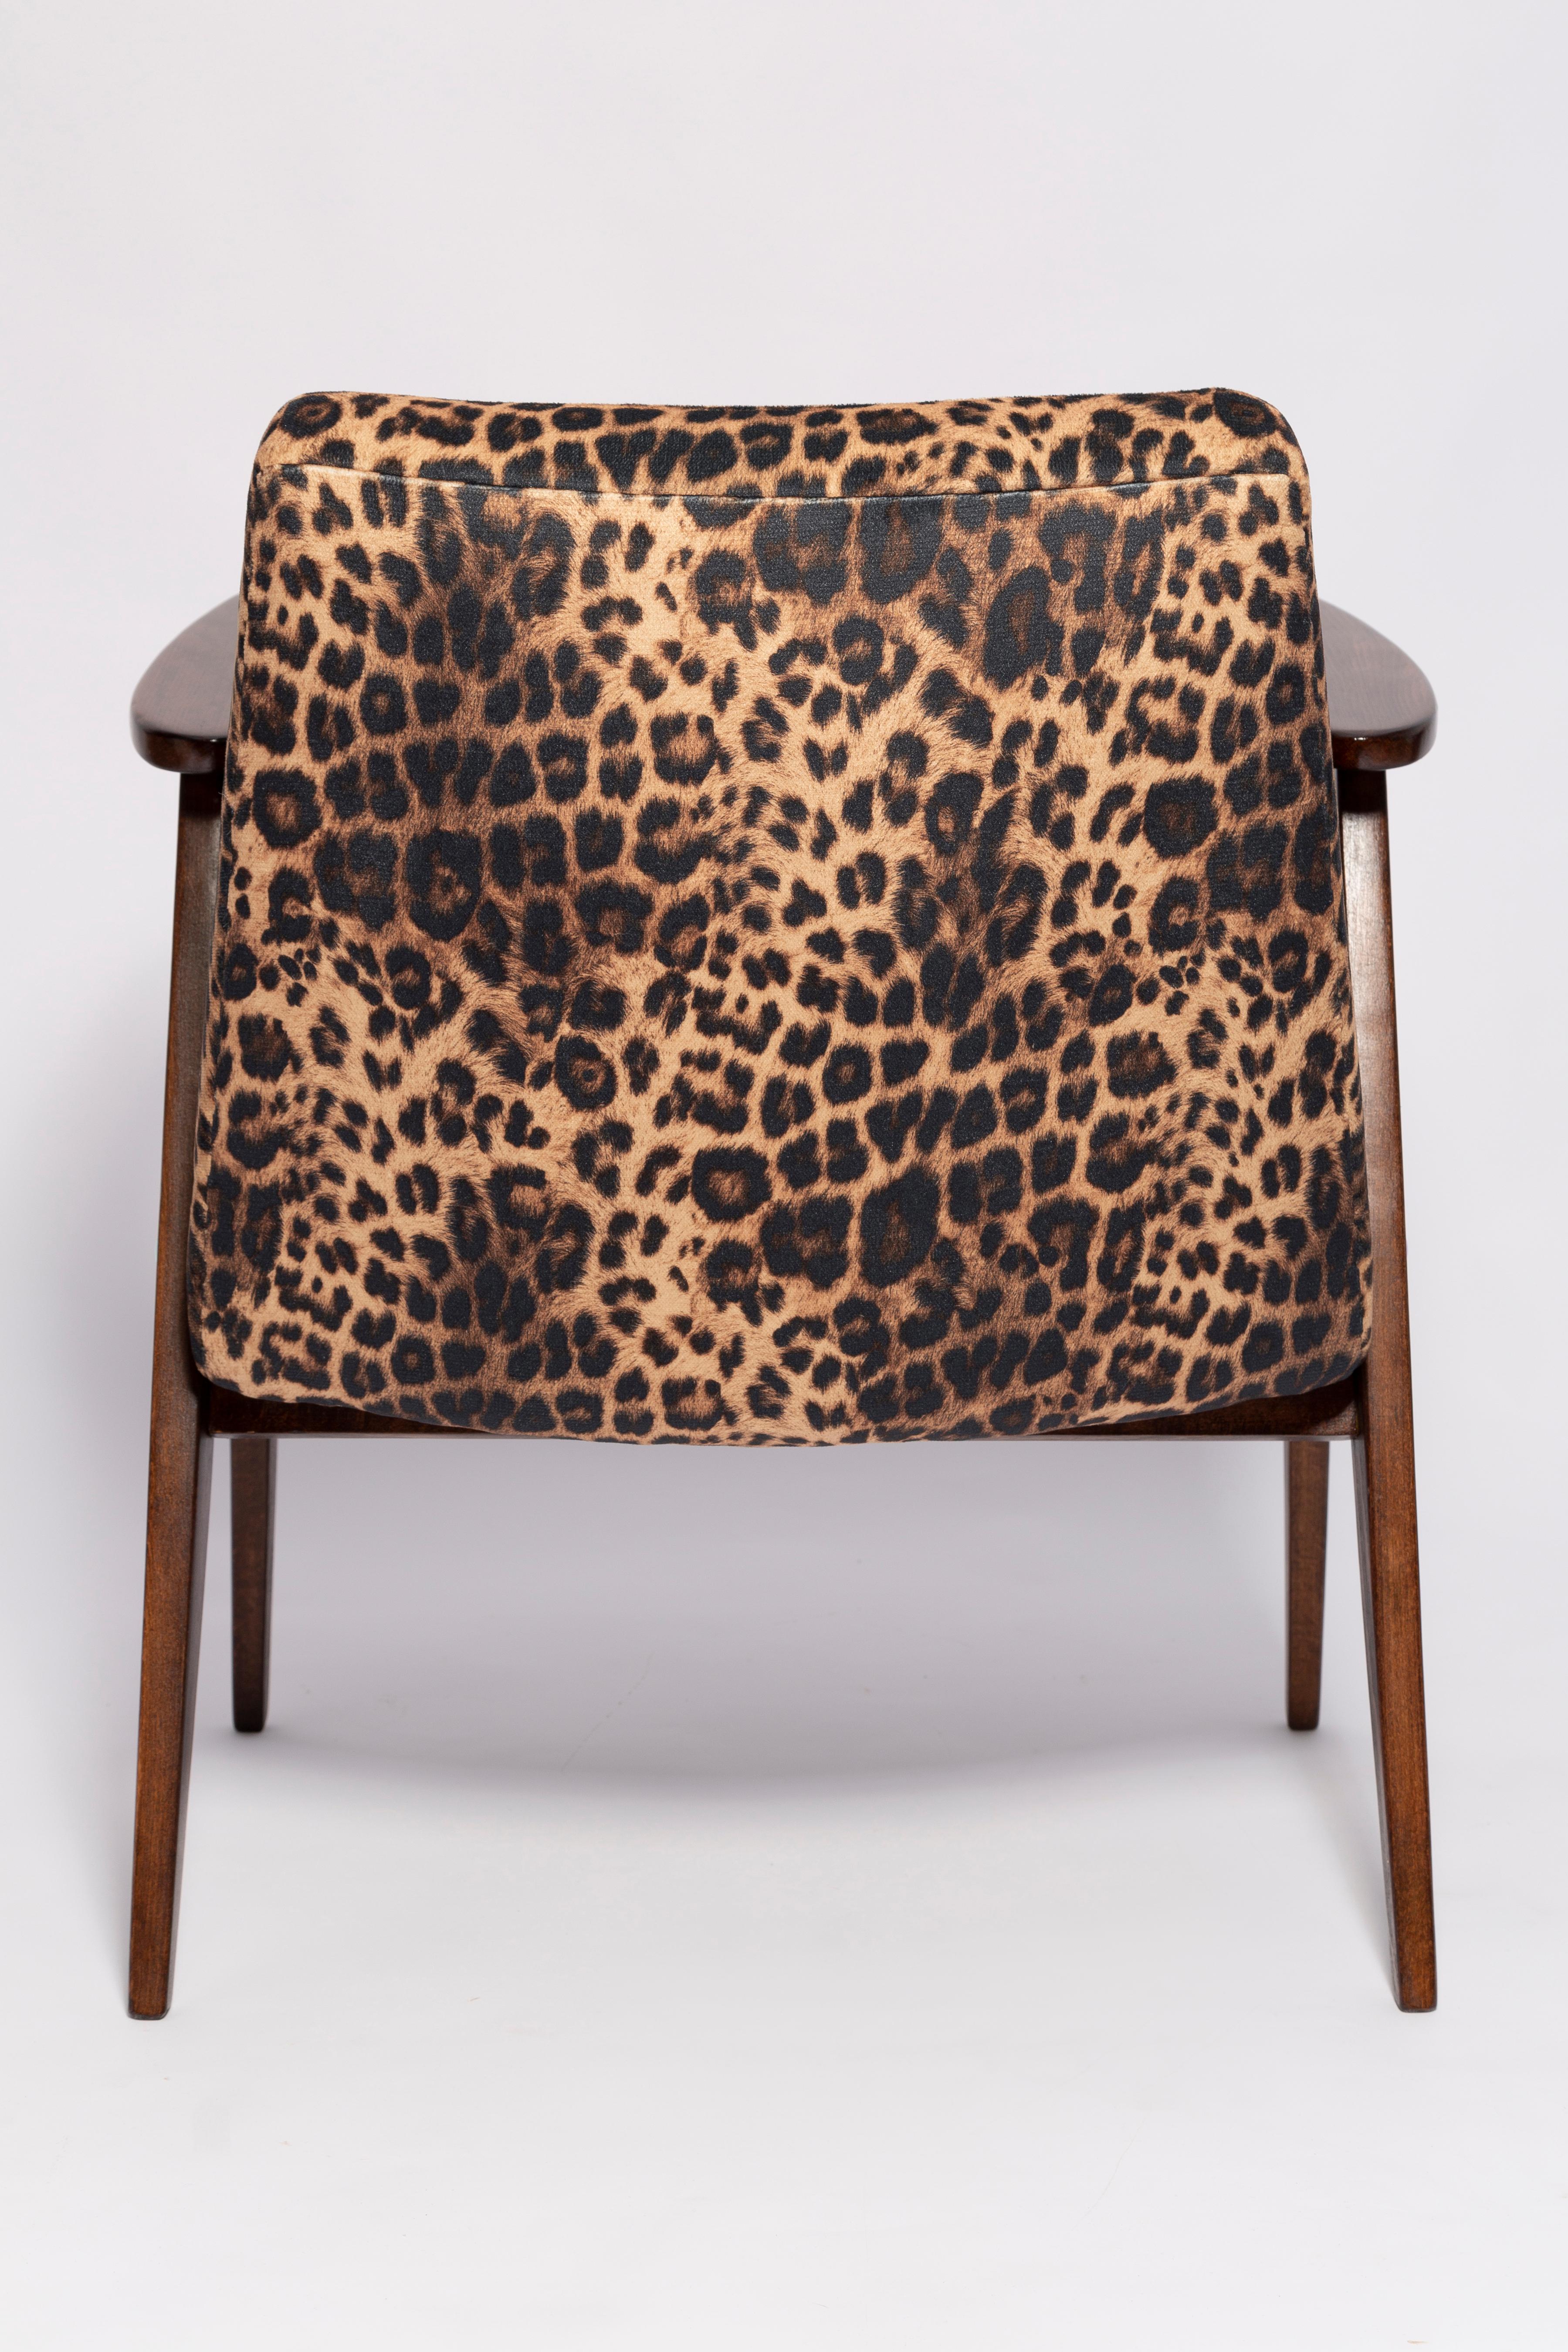 Two Midcentury 366 Armchairs in Leopard Print Velvet, Jozef Chierowski, 1960s For Sale 6